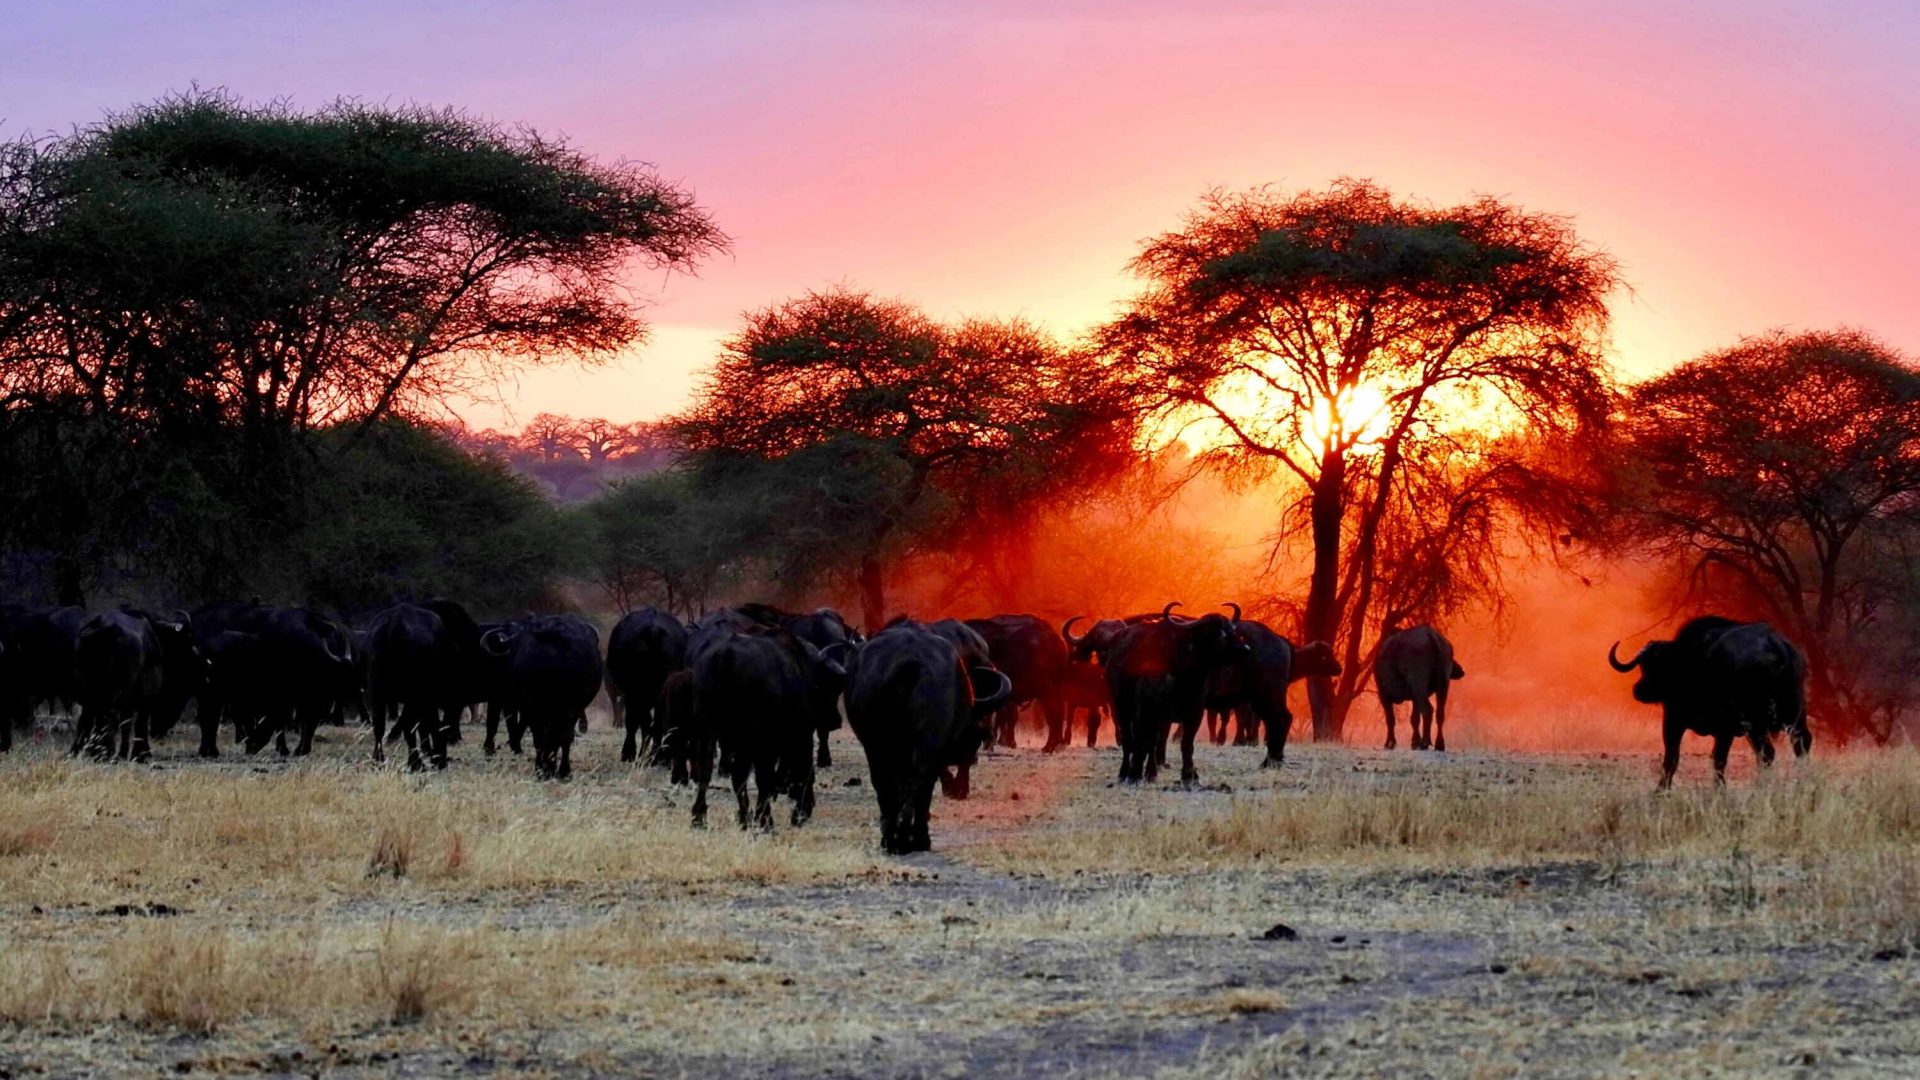 Elephants walk through the soft orange light at the end of the day. They pass through trees.